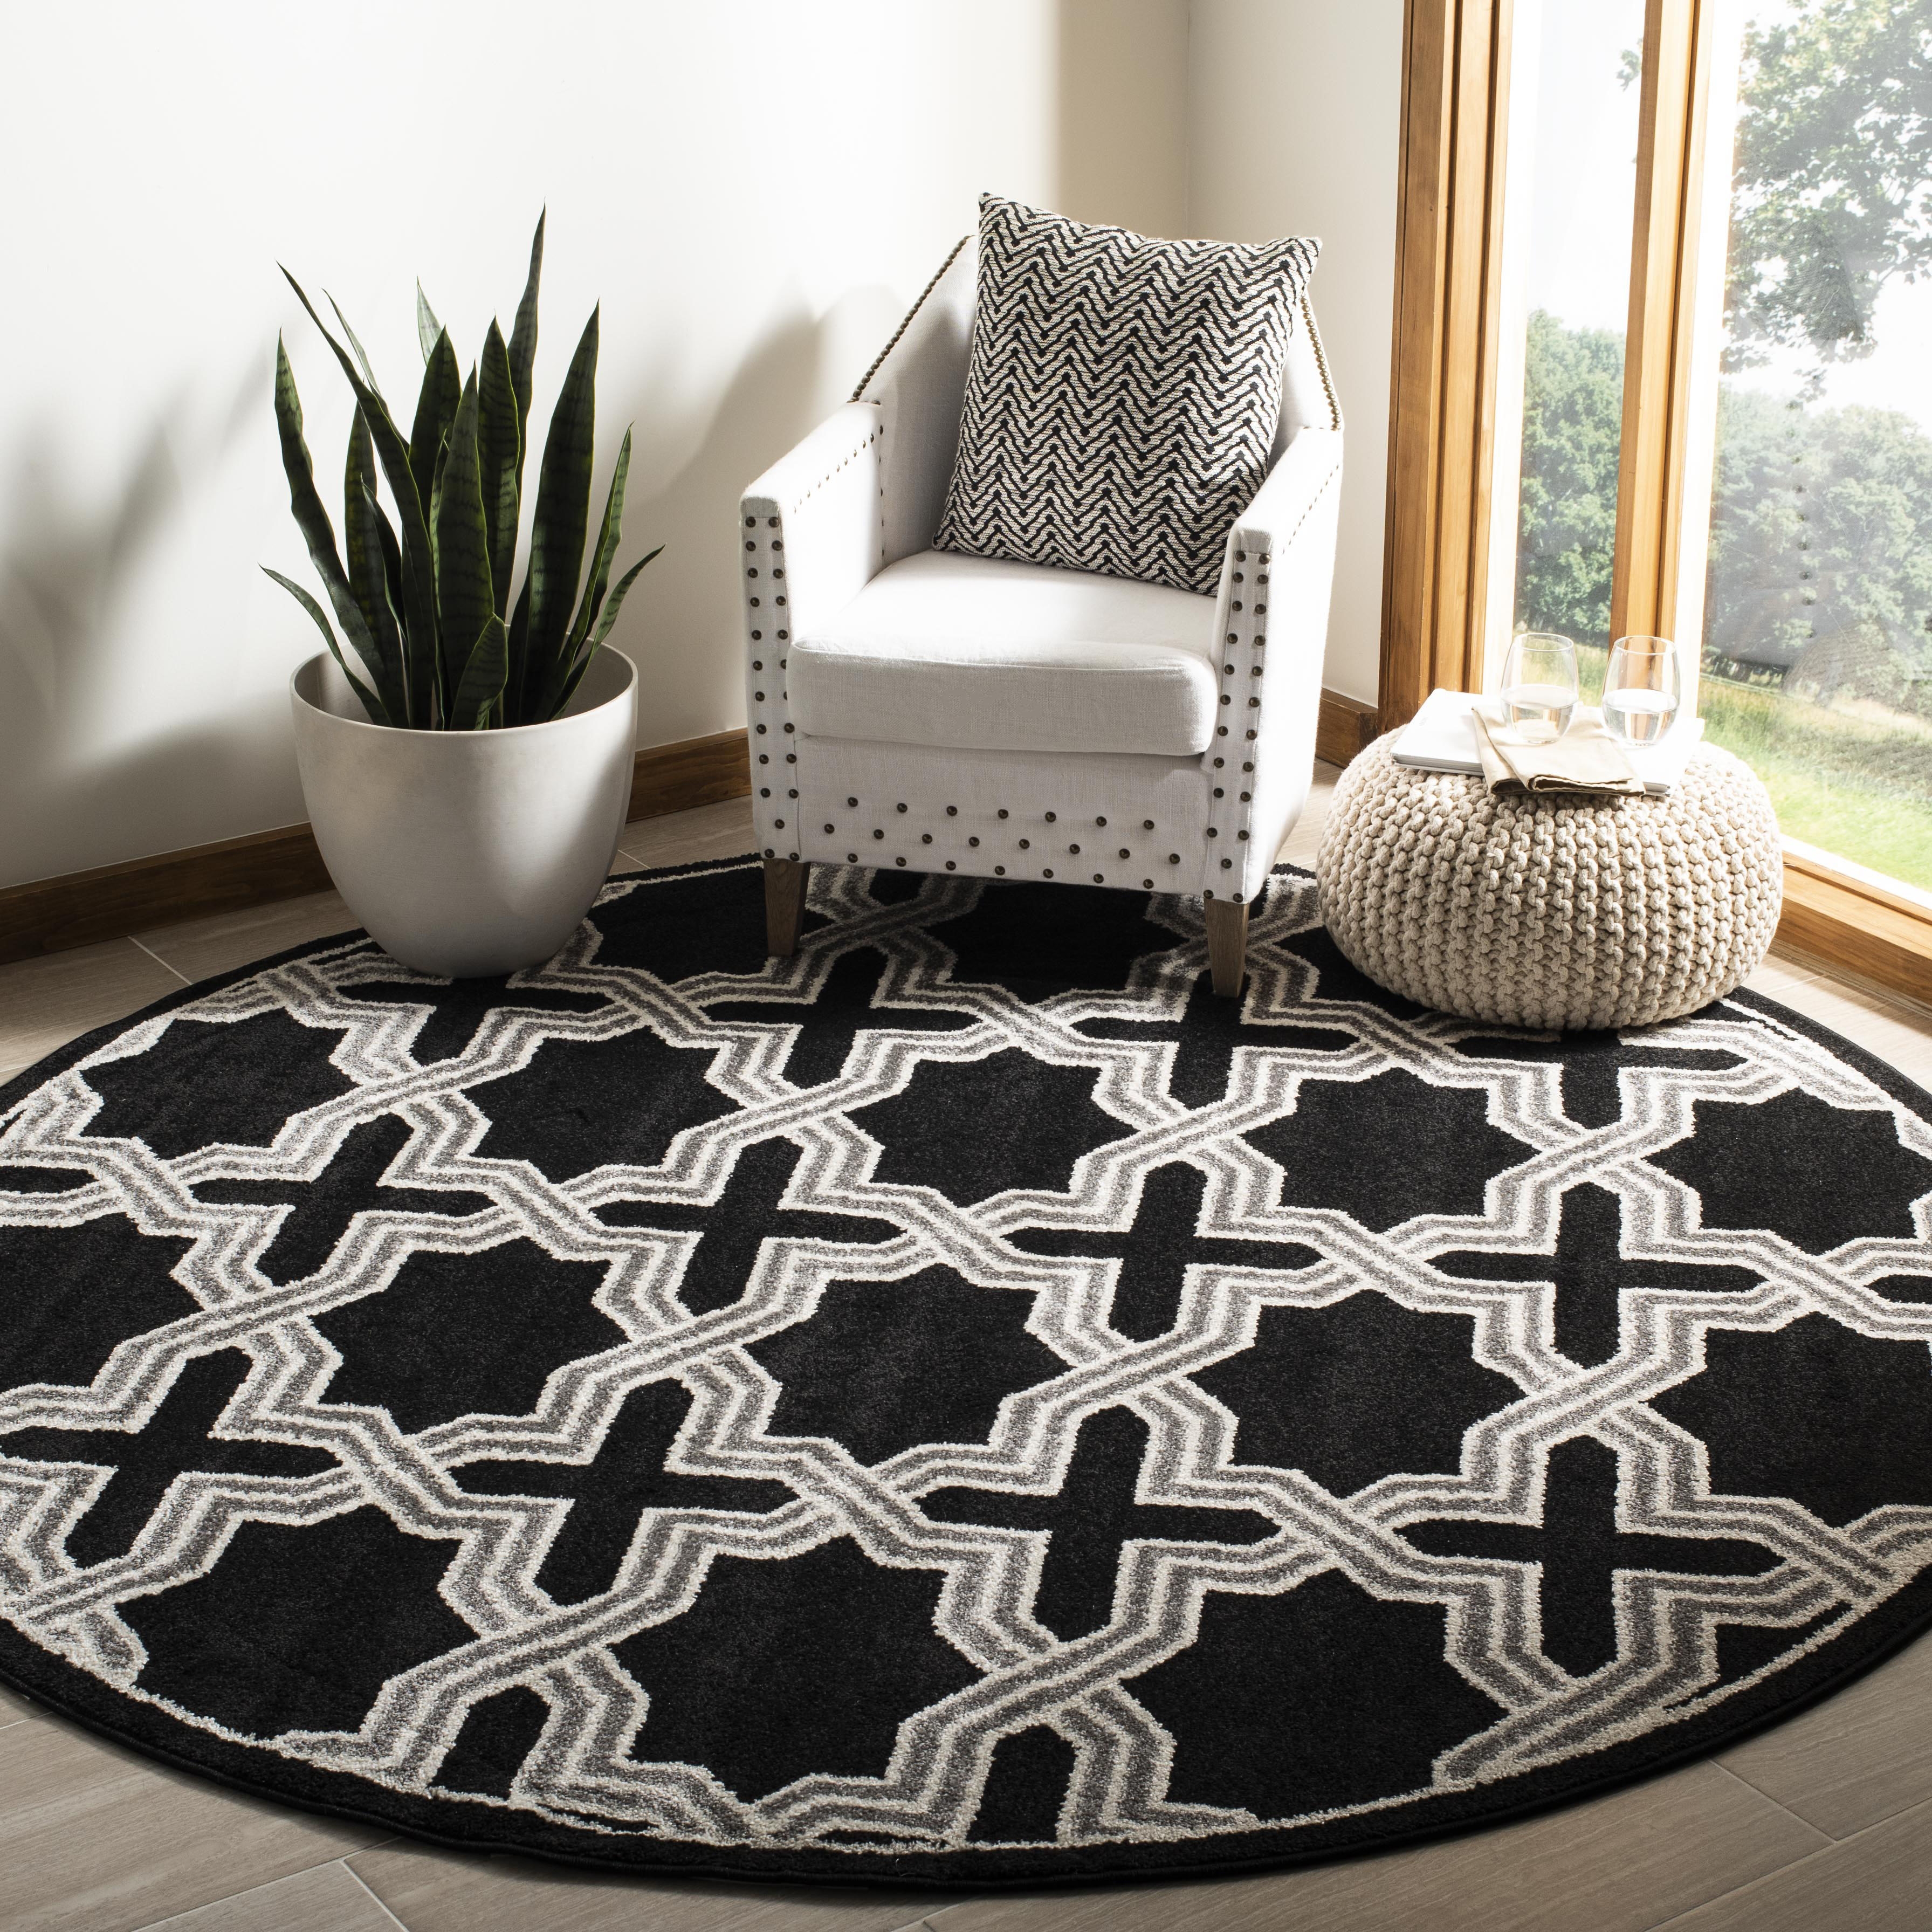 Arlo Home Indoor/Outdoor Woven Area Rug, AMT418L, Anthracite/Grey,  7' X 7' Round - Image 1